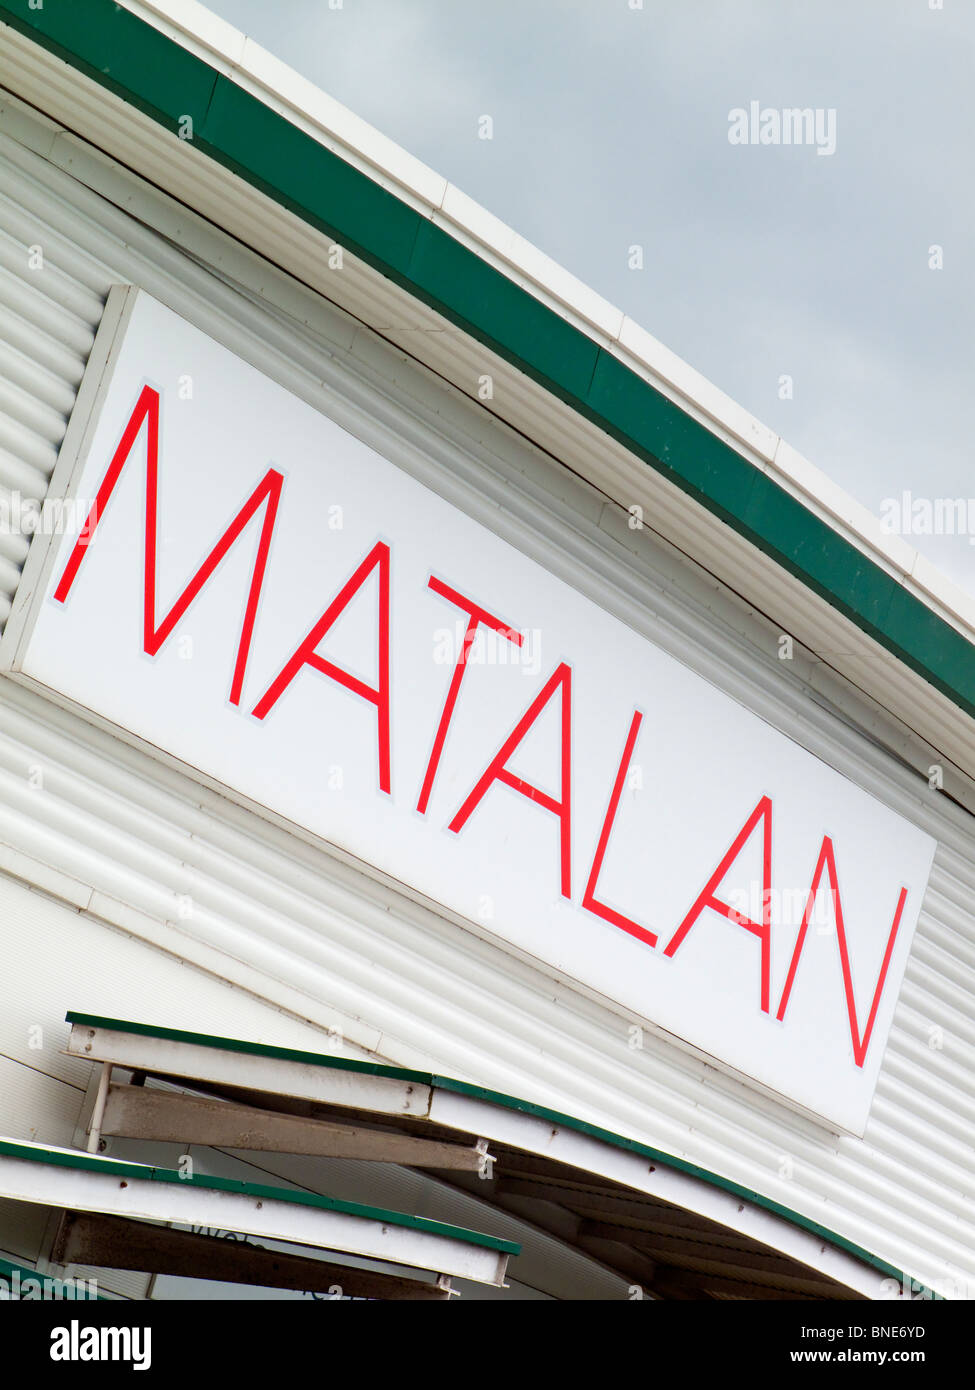 Matalan clothing and household store in a retail park in the UK the company was founded in 1985 Stock Photo